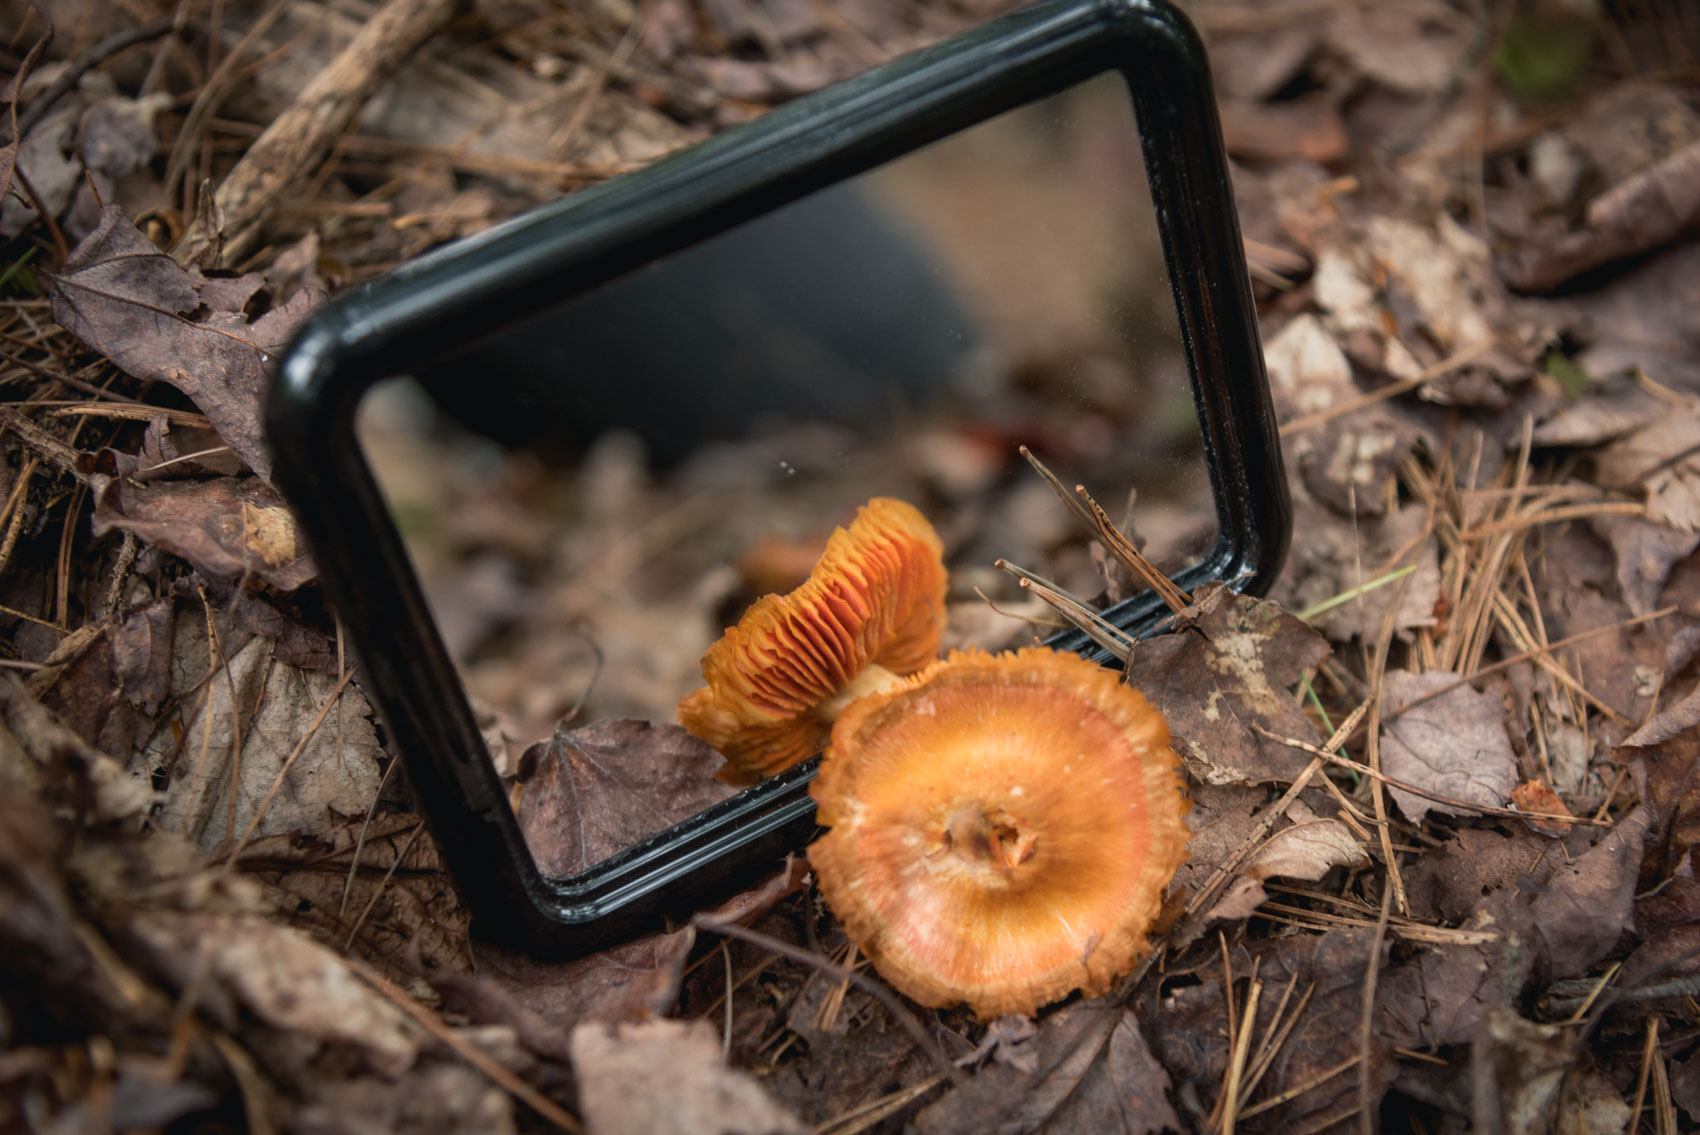 A small mirror looking at the underside of an orange mushroom